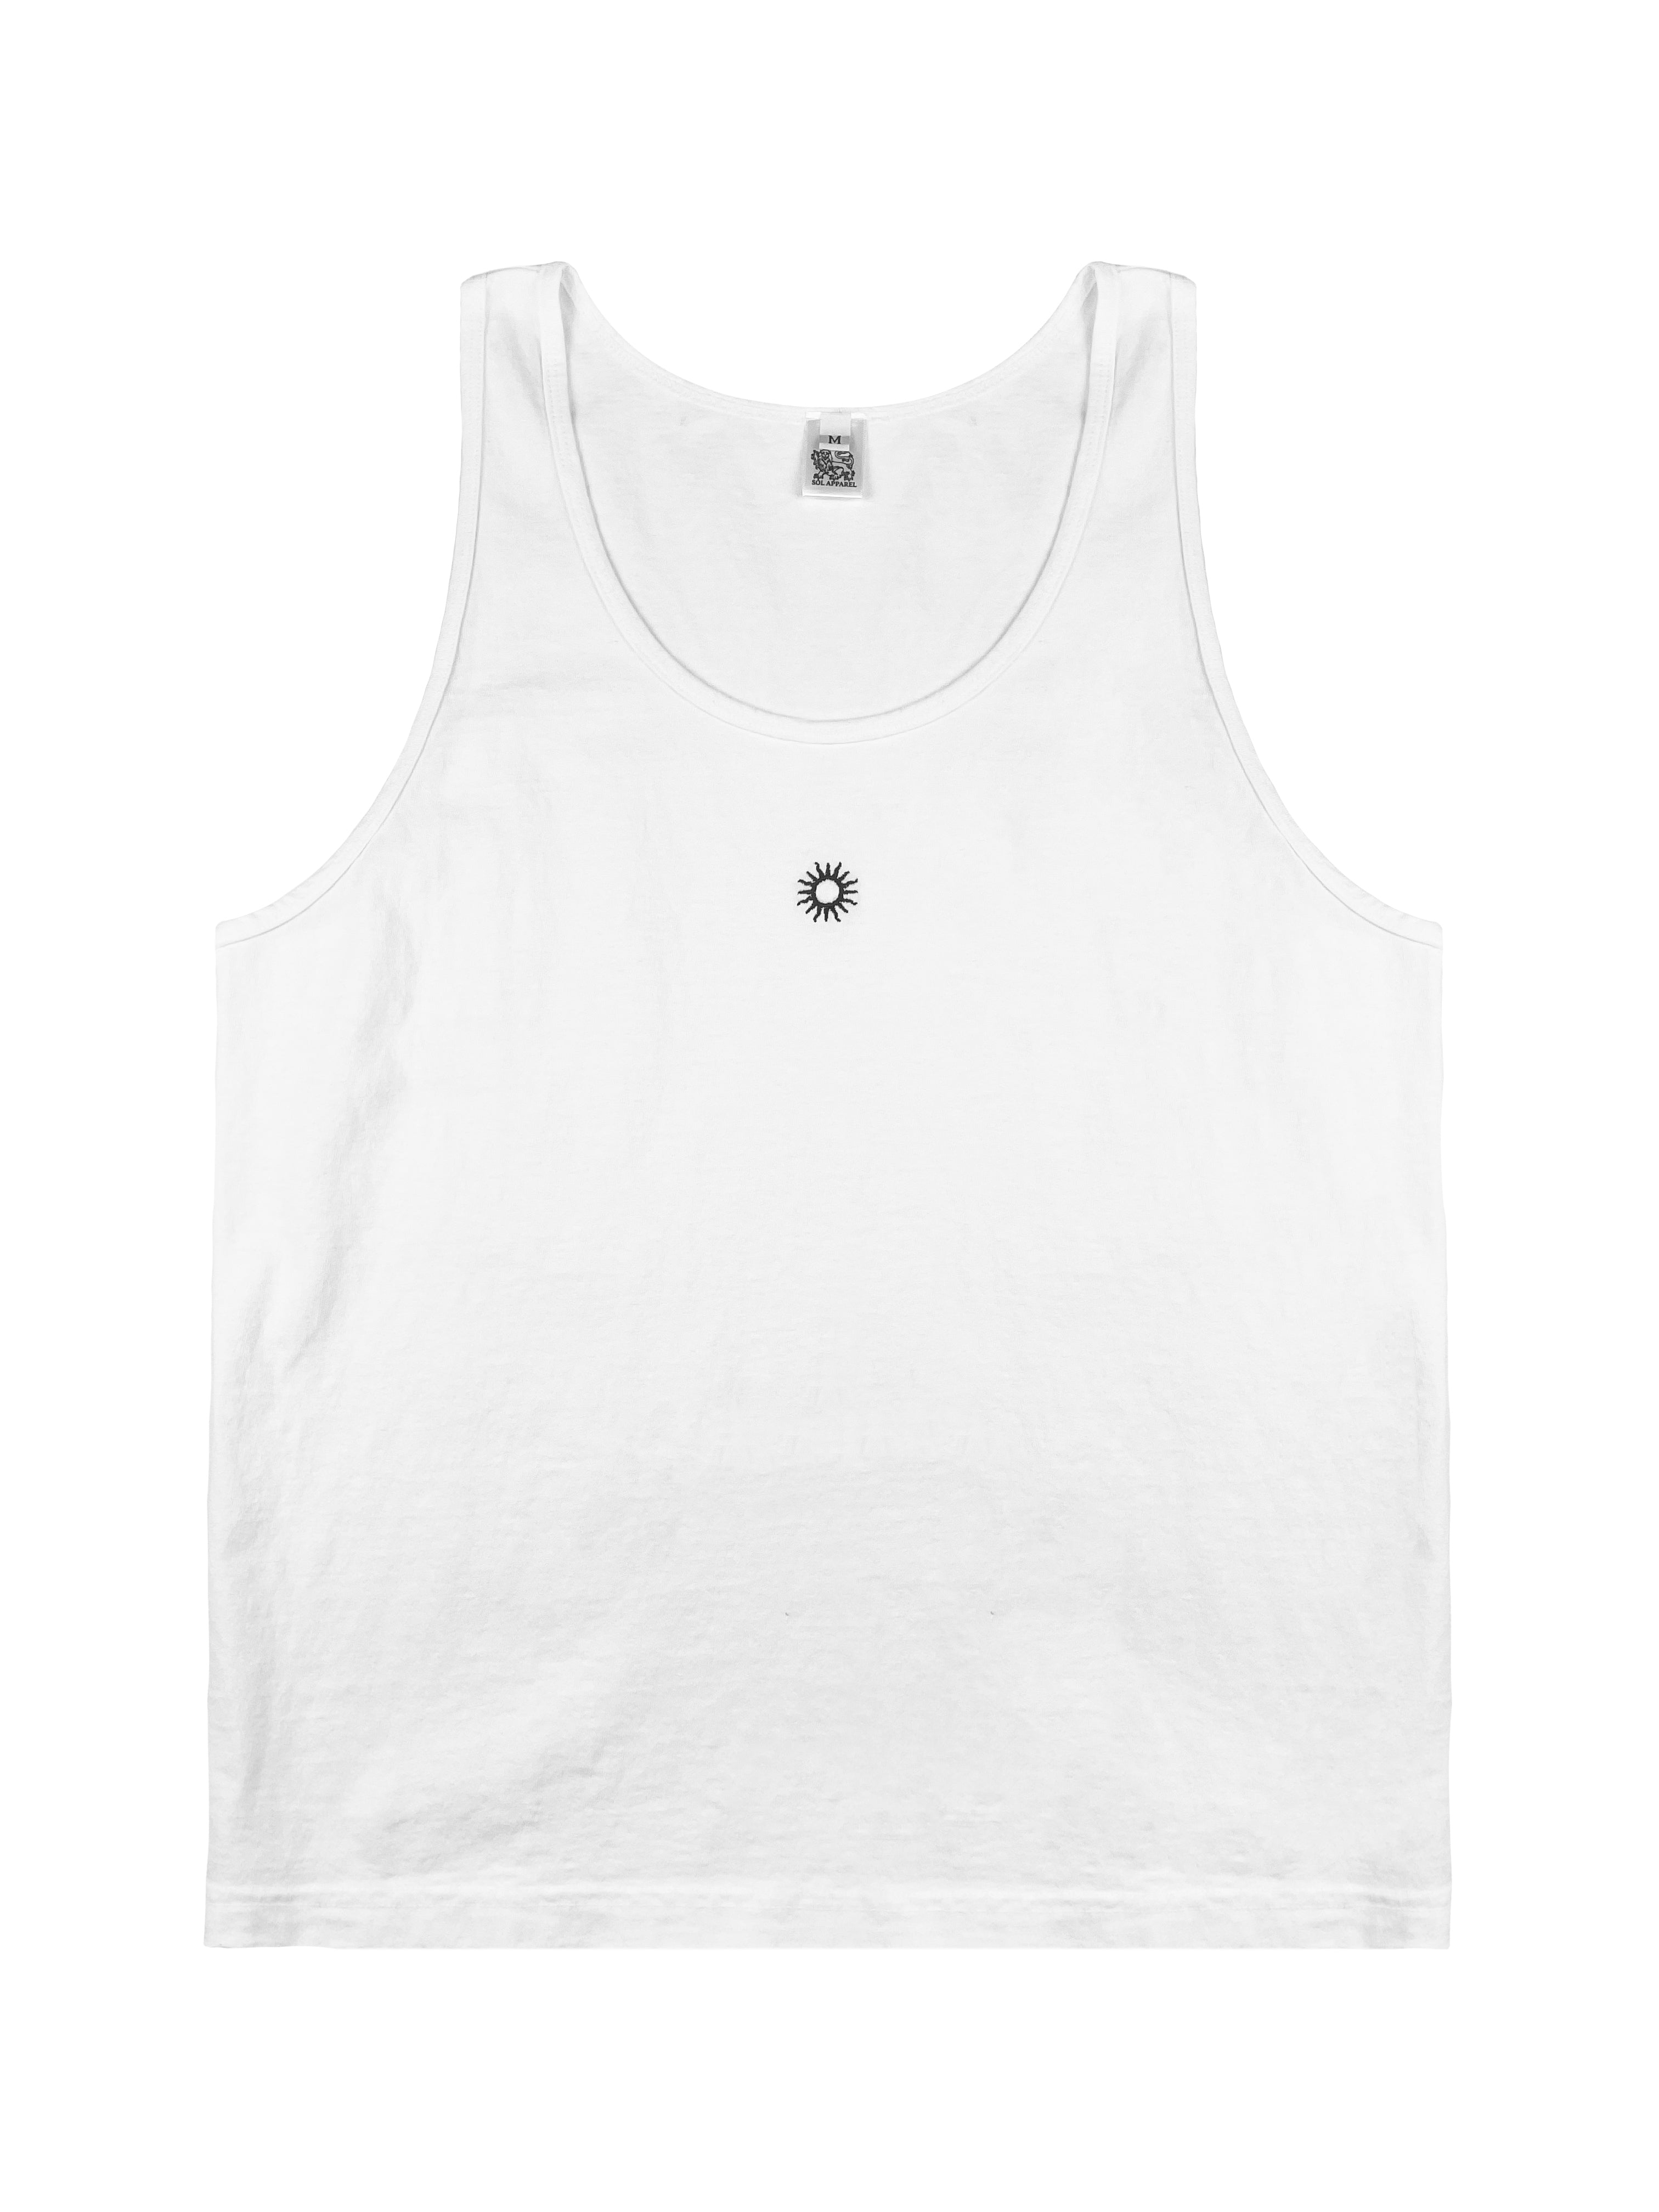 mens white cotton tank top for gym